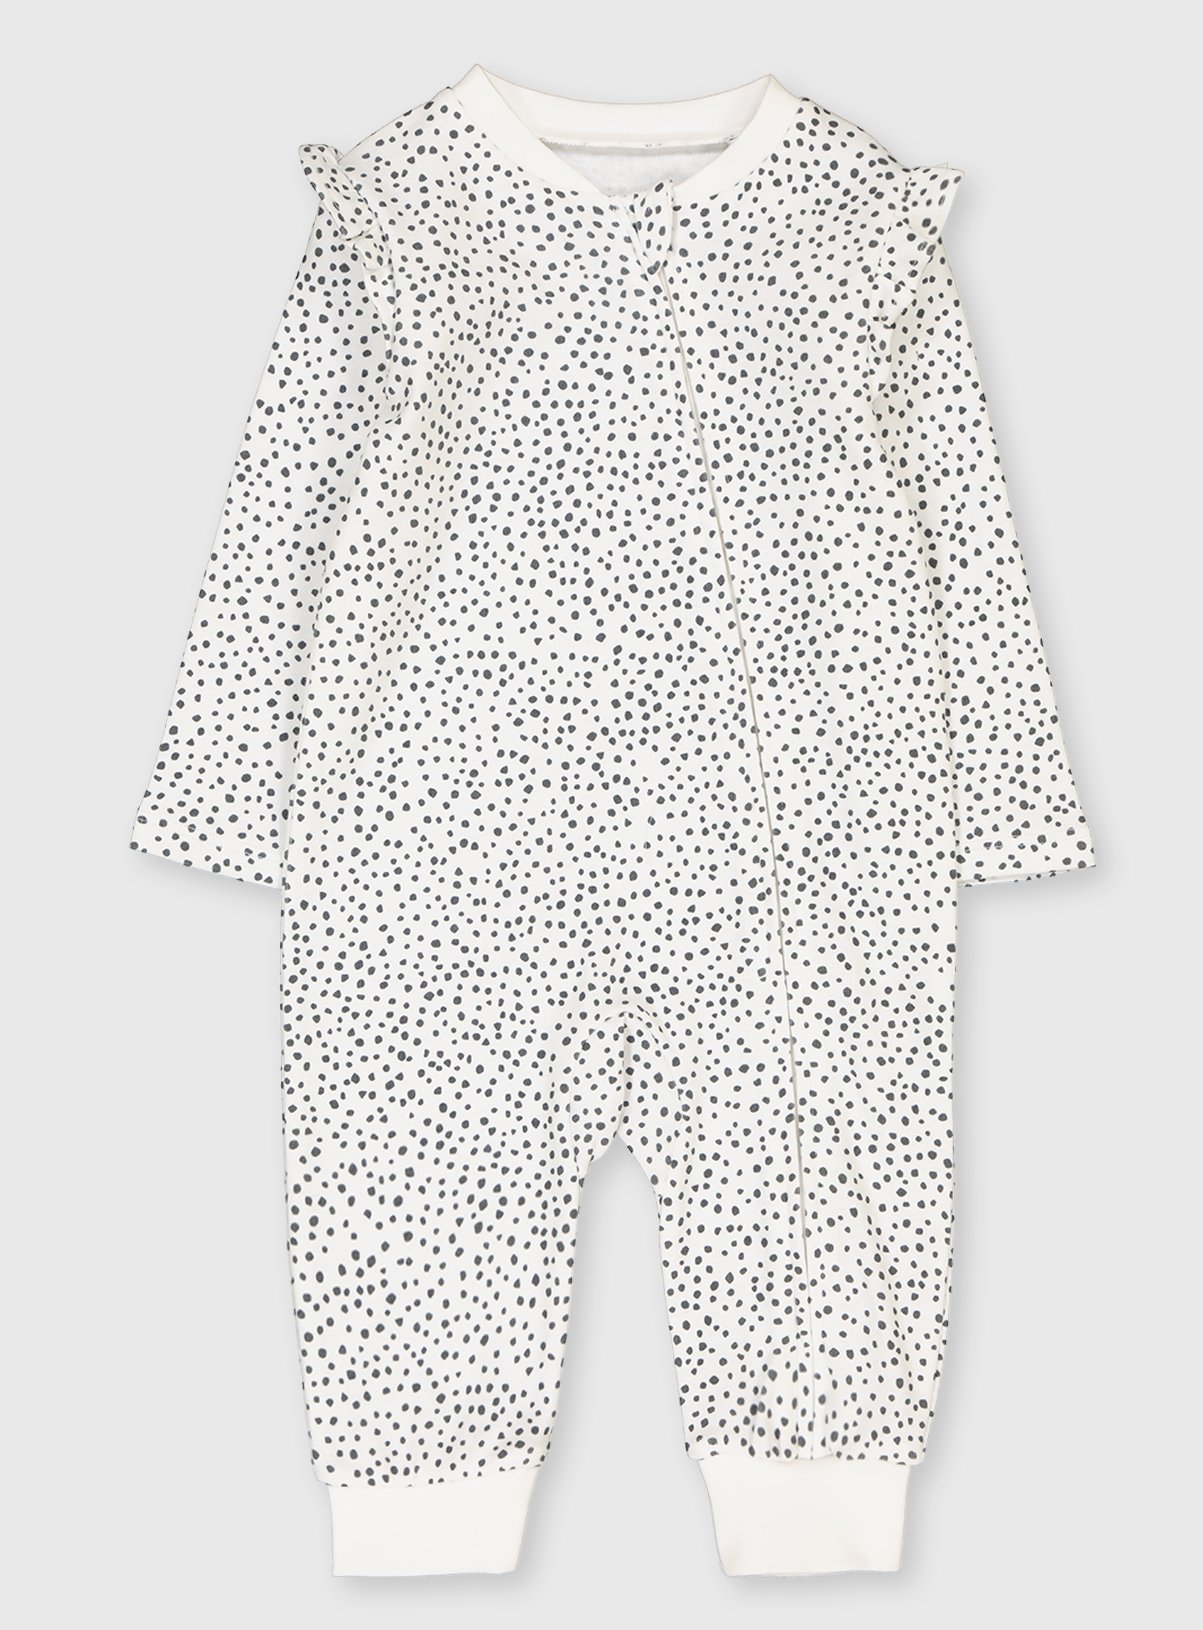 neutral baby sleepsuits